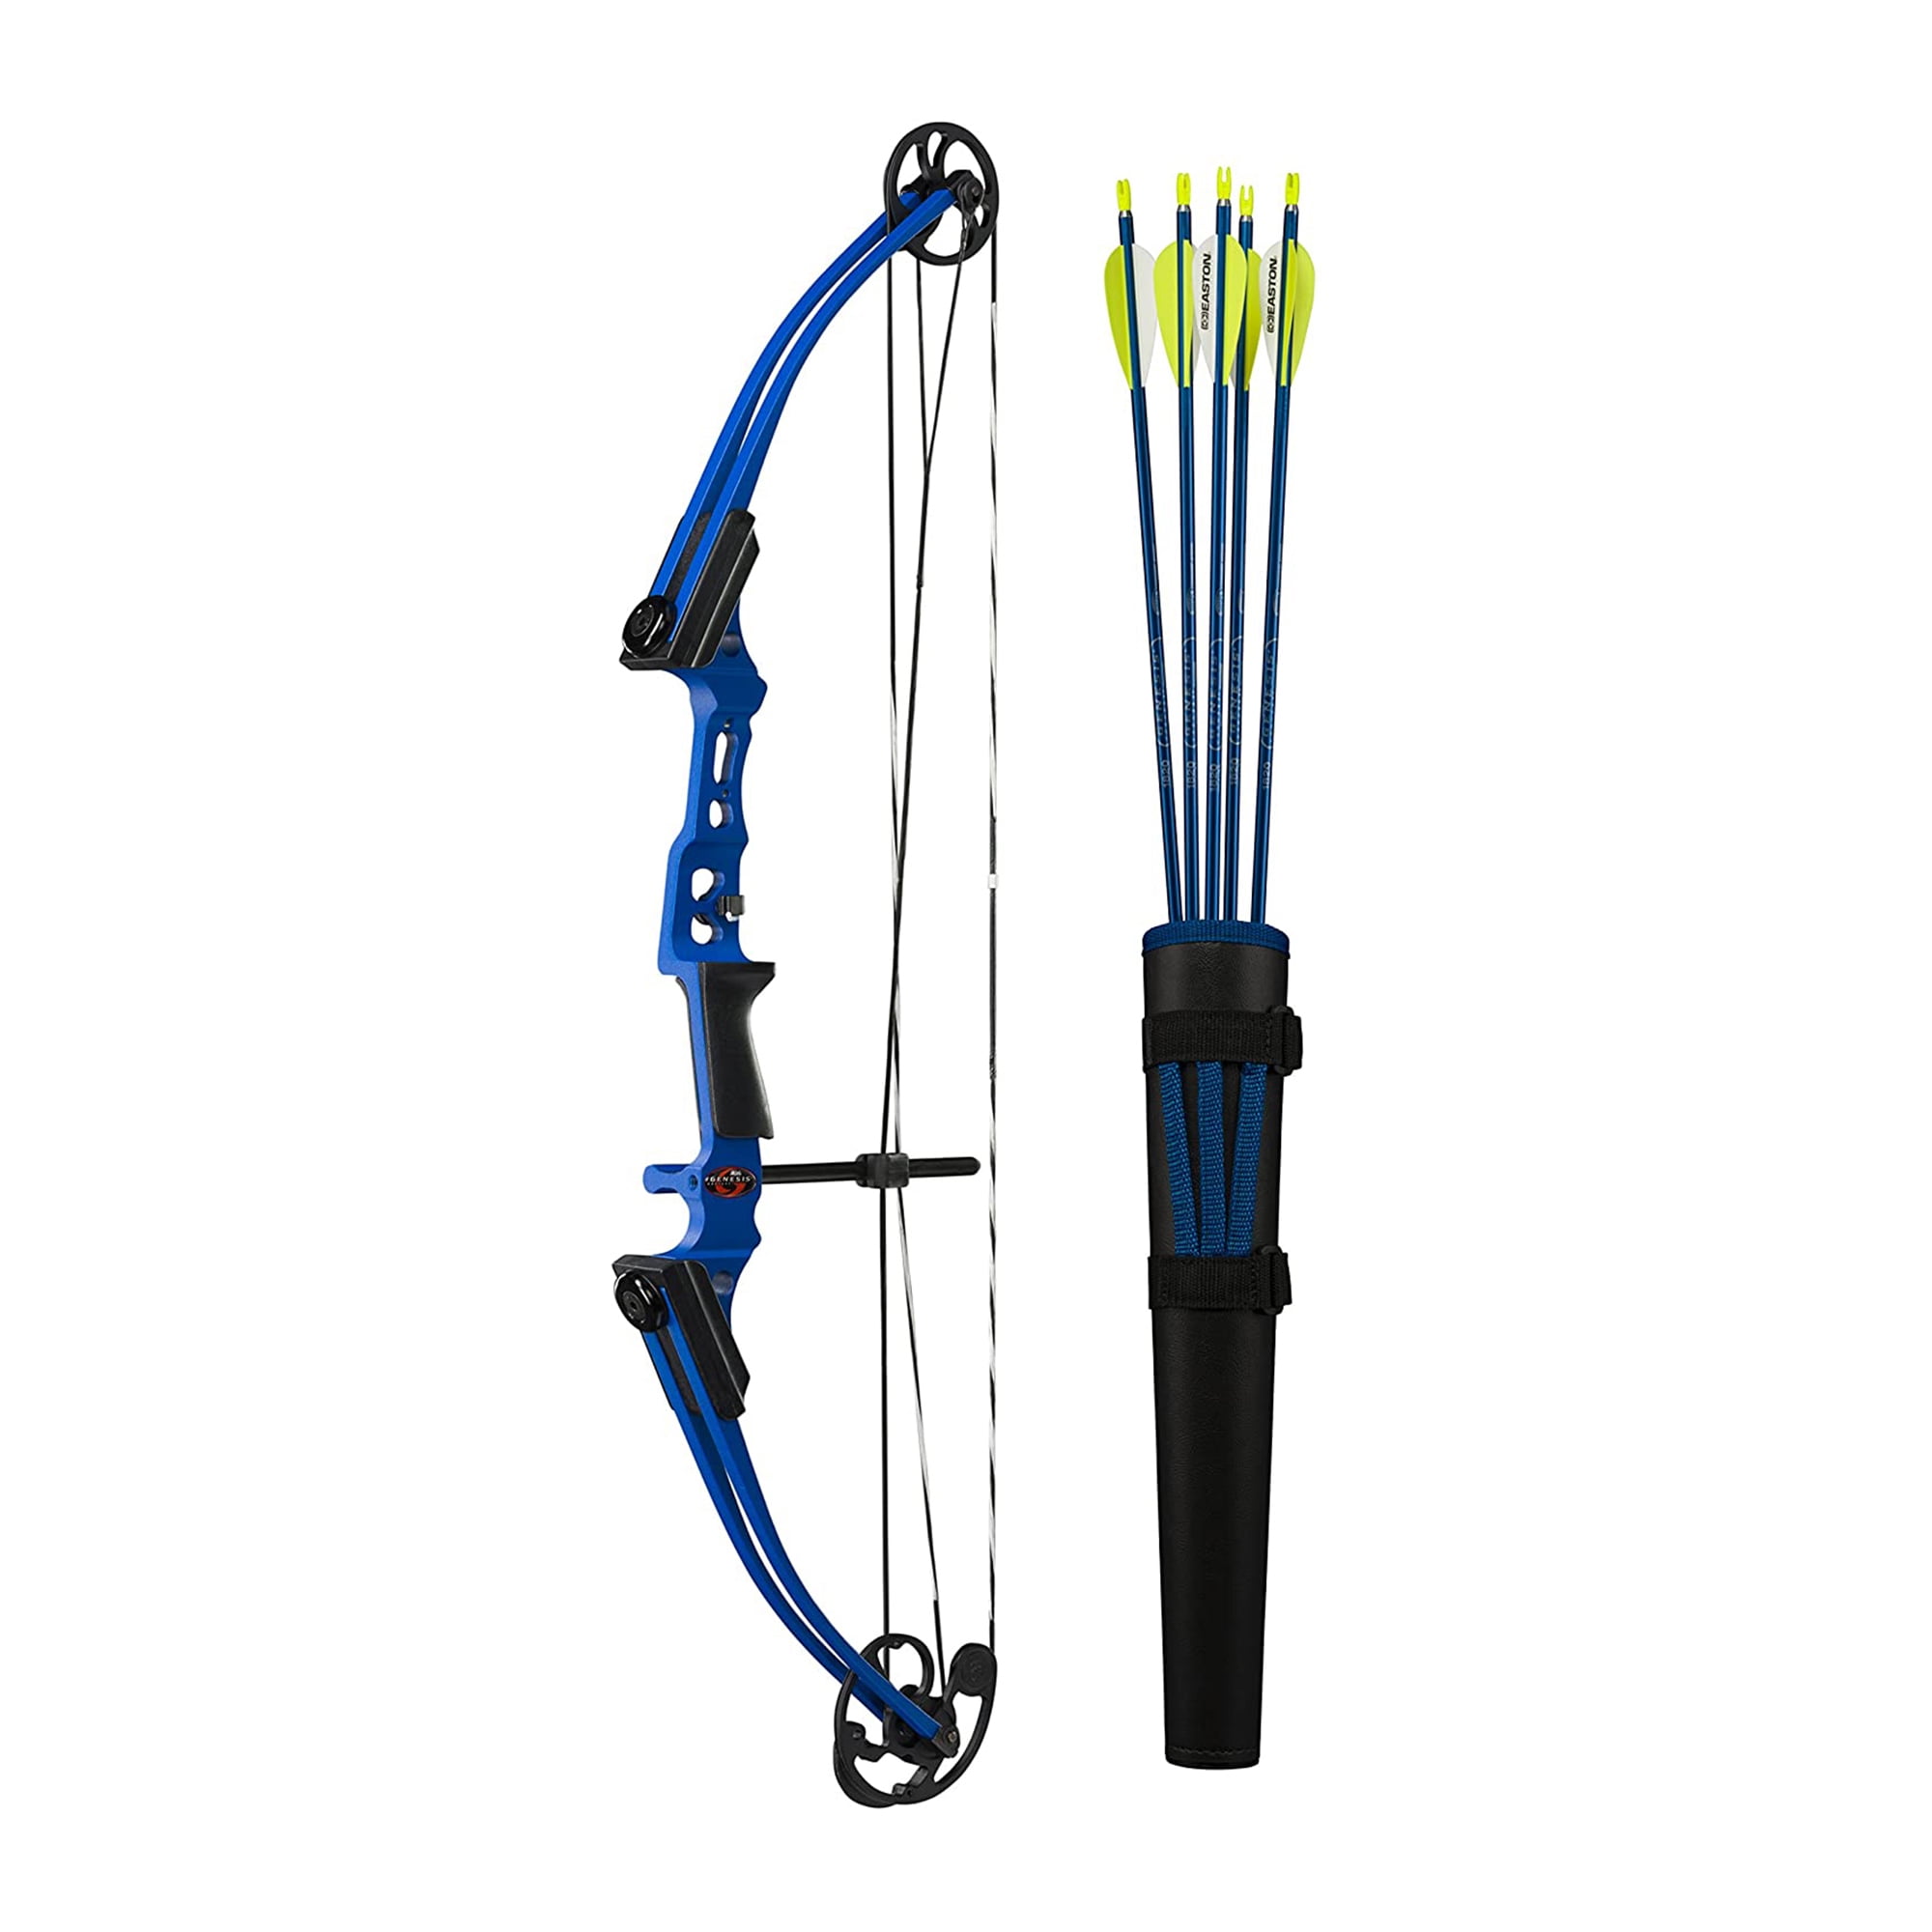 Details about   Archery Bow Accessories Package 